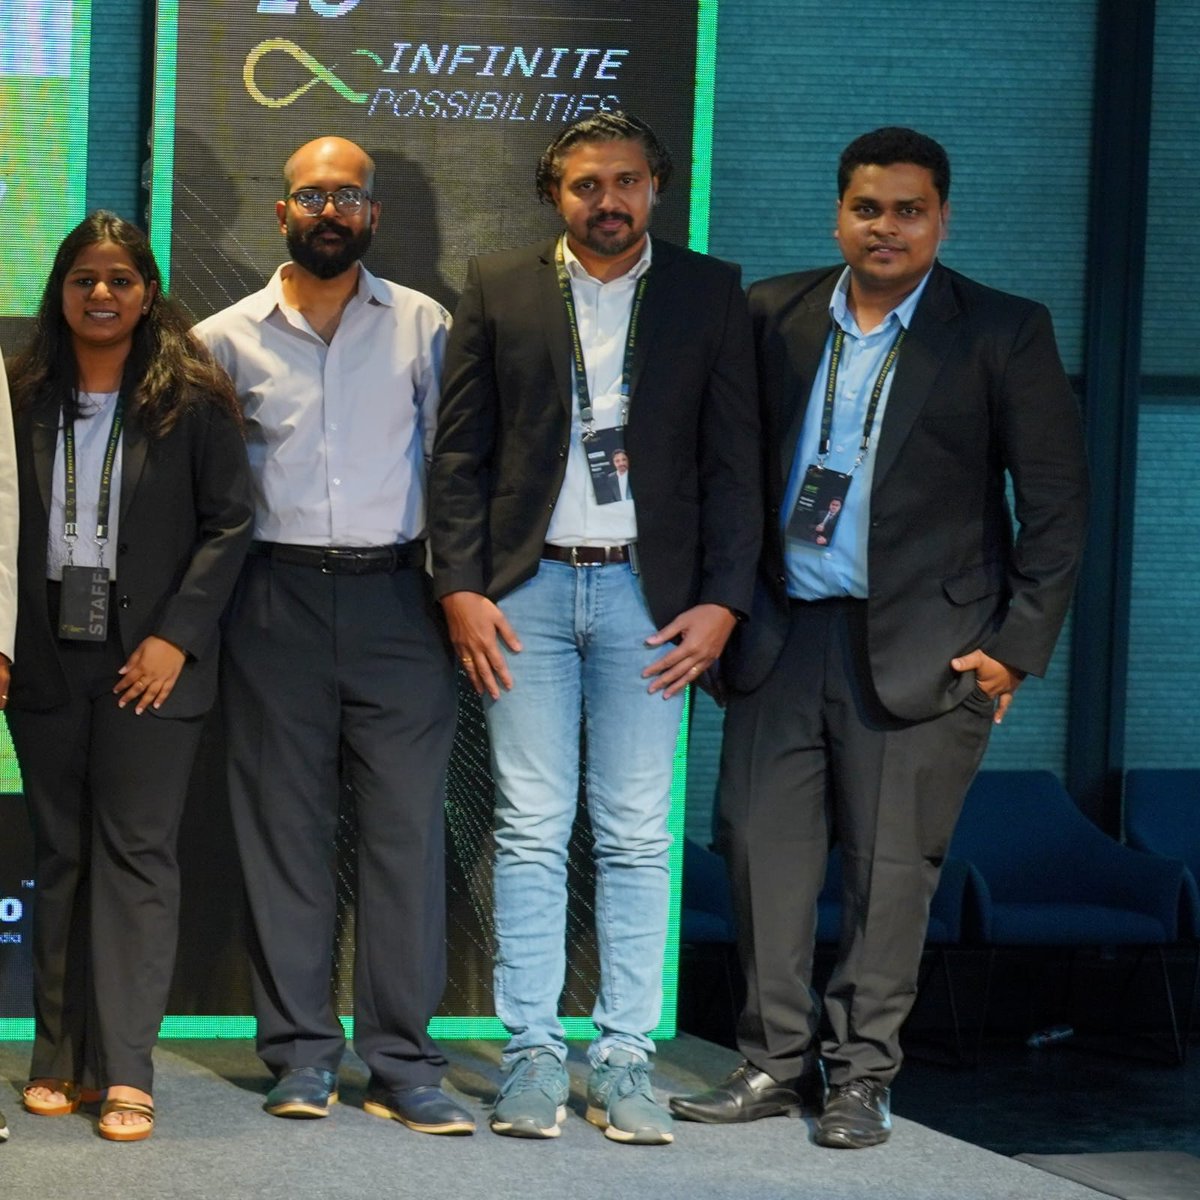 Our vibrant team behind the success of EVIS 2024, Hyderabad. Their presence & hardwork paved the way on April 13 and 14 which gave birth to a new era of EVolution
#sustainabletransport #investmentopportunities #investmentadvice #futureofmobility #hyderabadevent